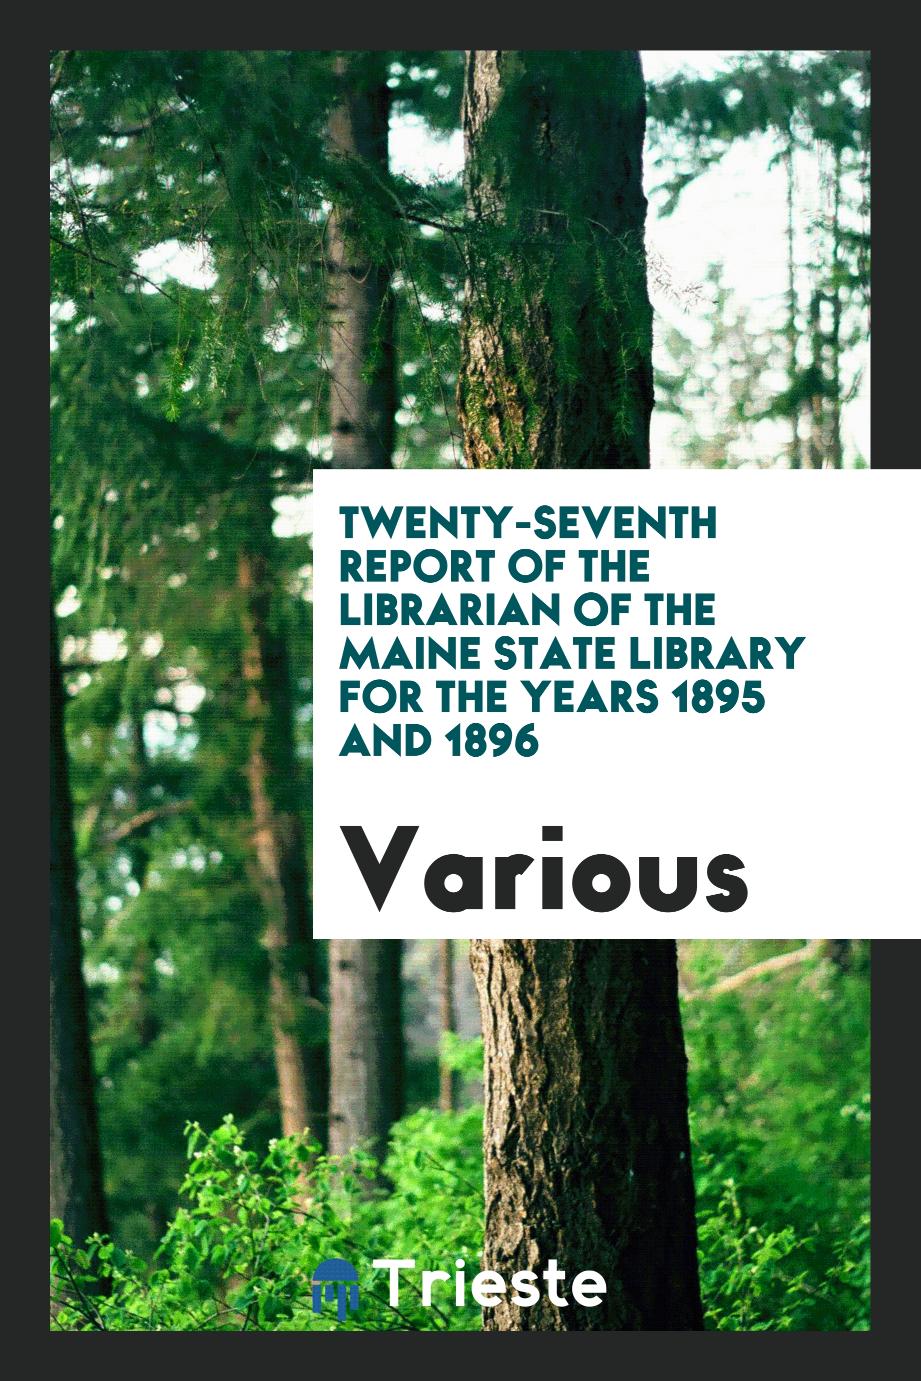 Twenty-Seventh Report of the Librarian of the Maine State Library for the Years 1895 and 1896